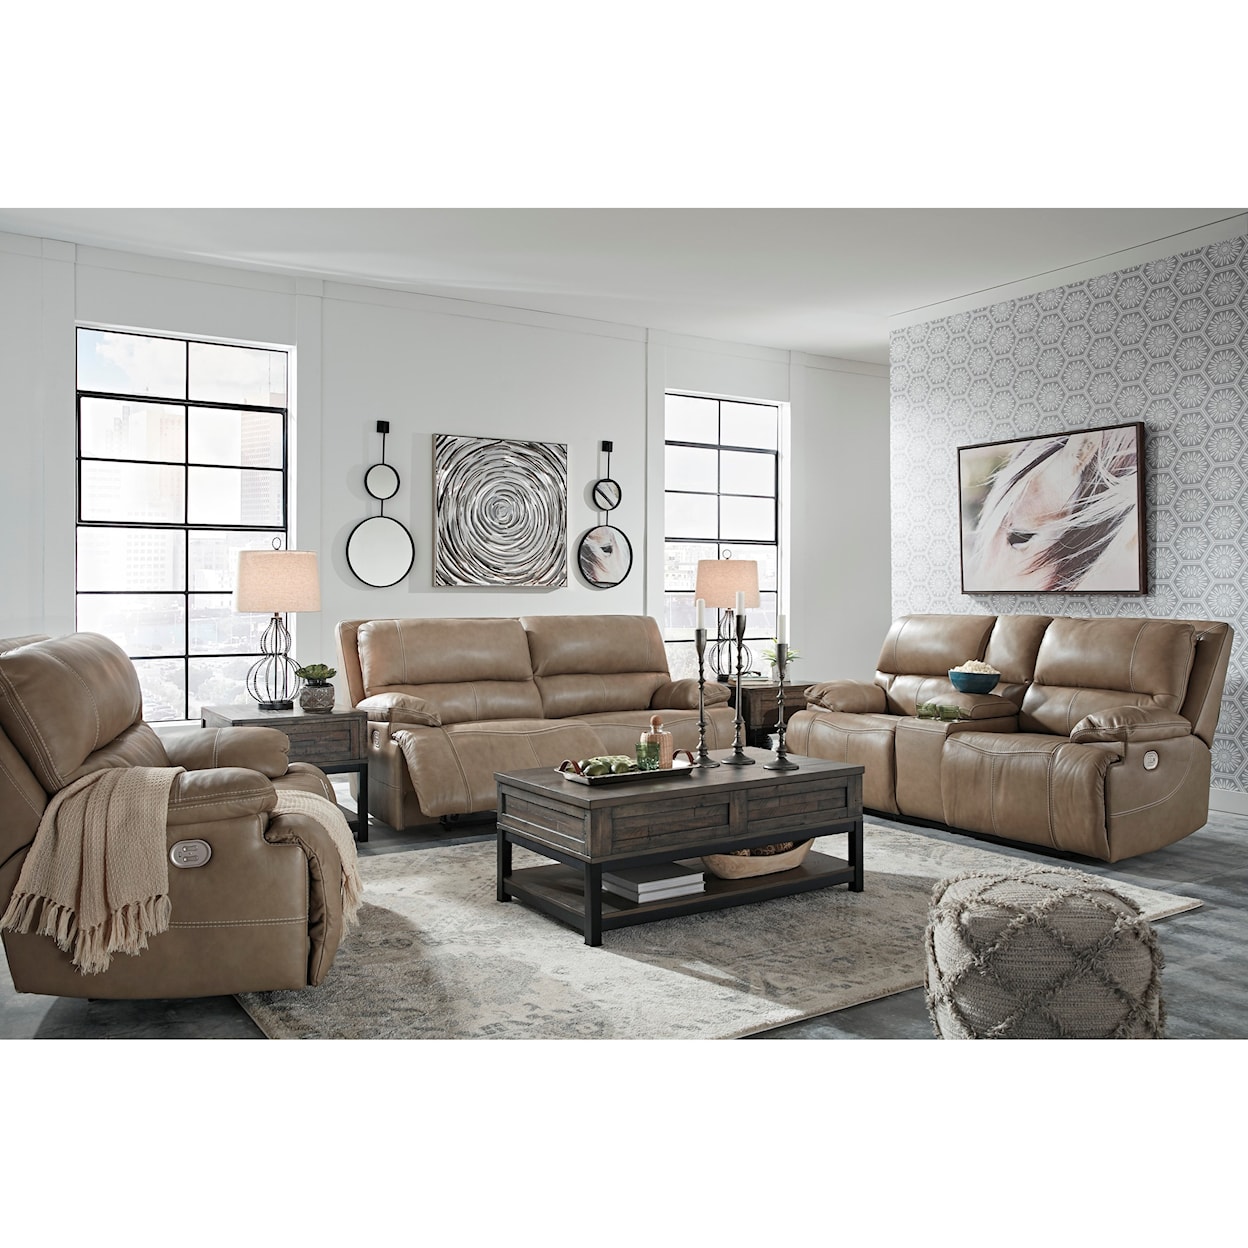 Signature Design by Ashley Ricmen Power Reclining Living Room Group